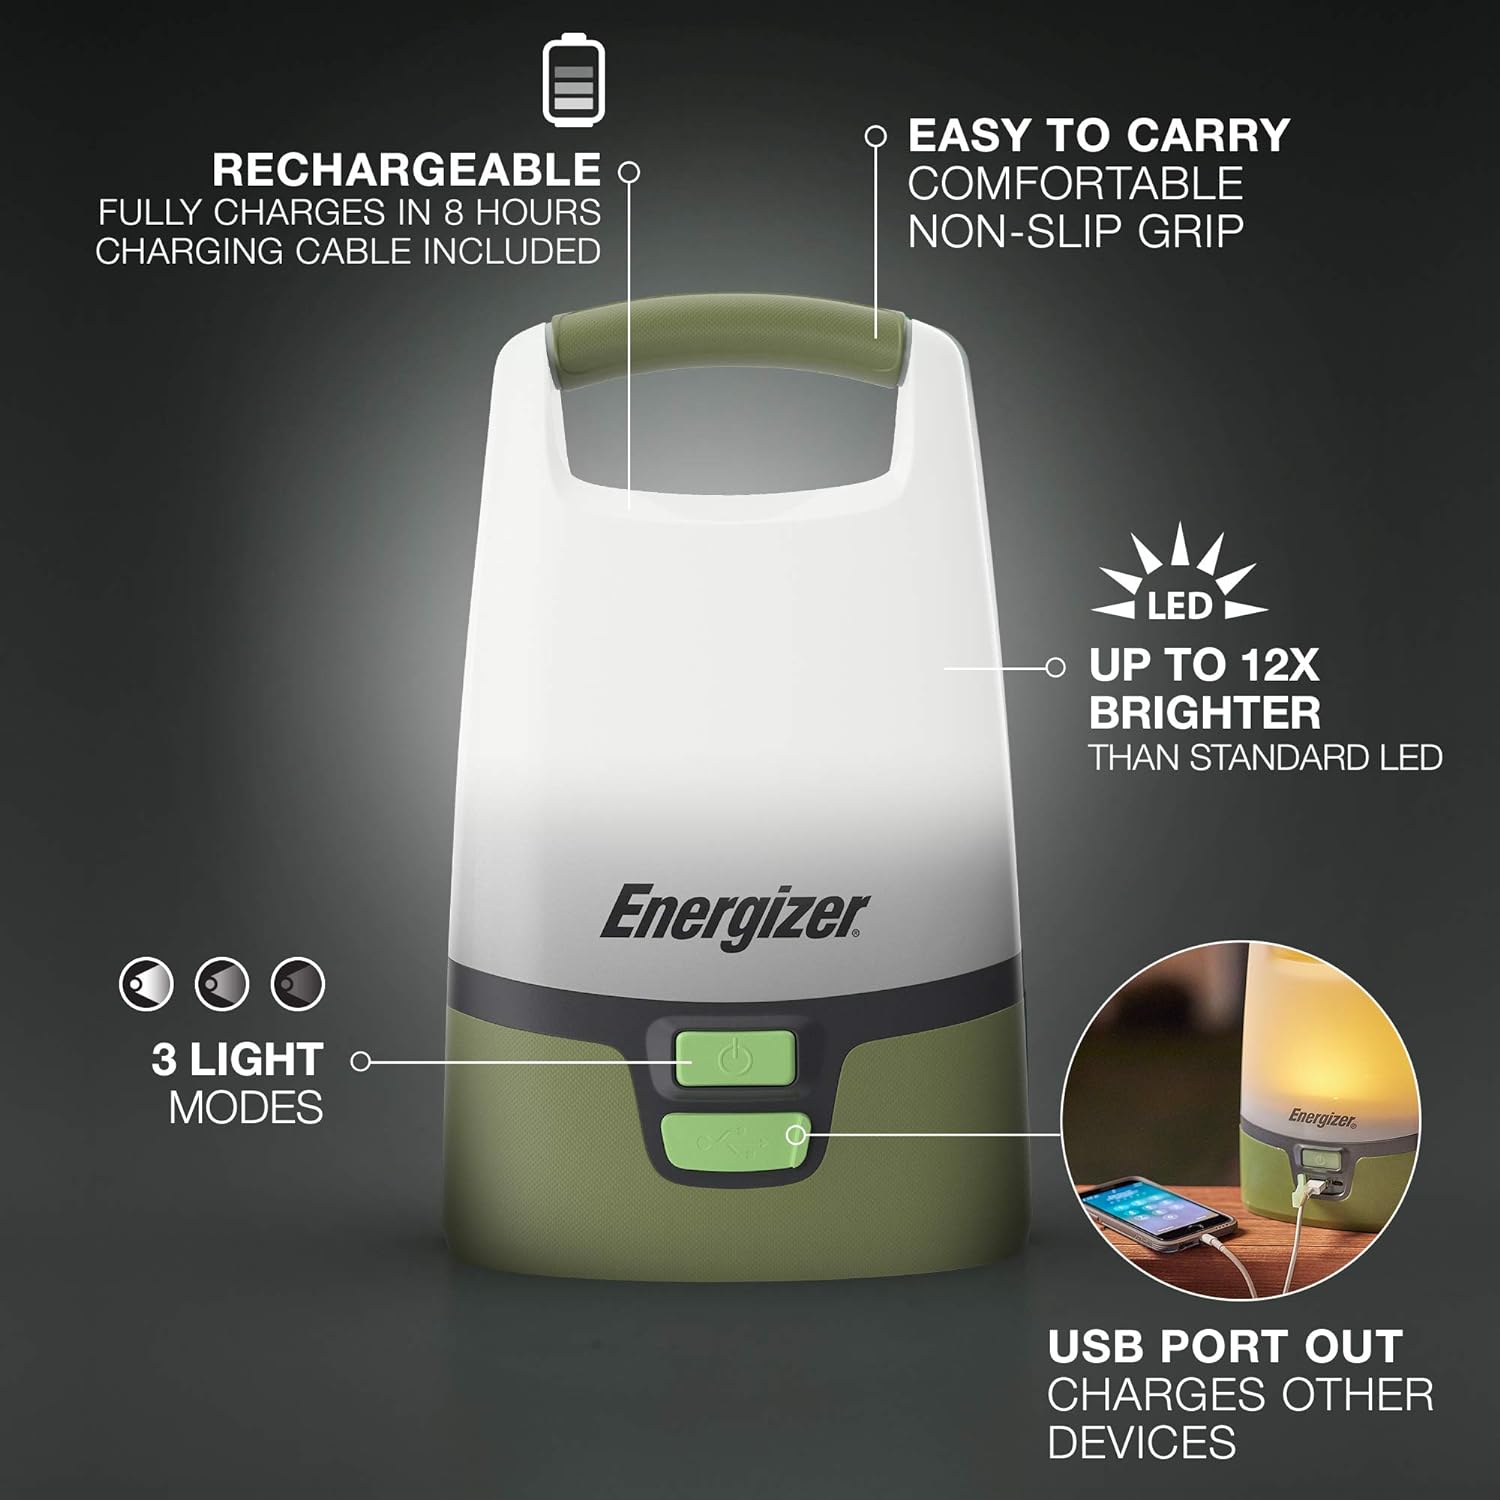 Energizer Vision LED Camping Lantern, Bright Rechargeable Lantern, Water Resistant Emergency Light with Charging Cable, Pack of 1, Forest Green